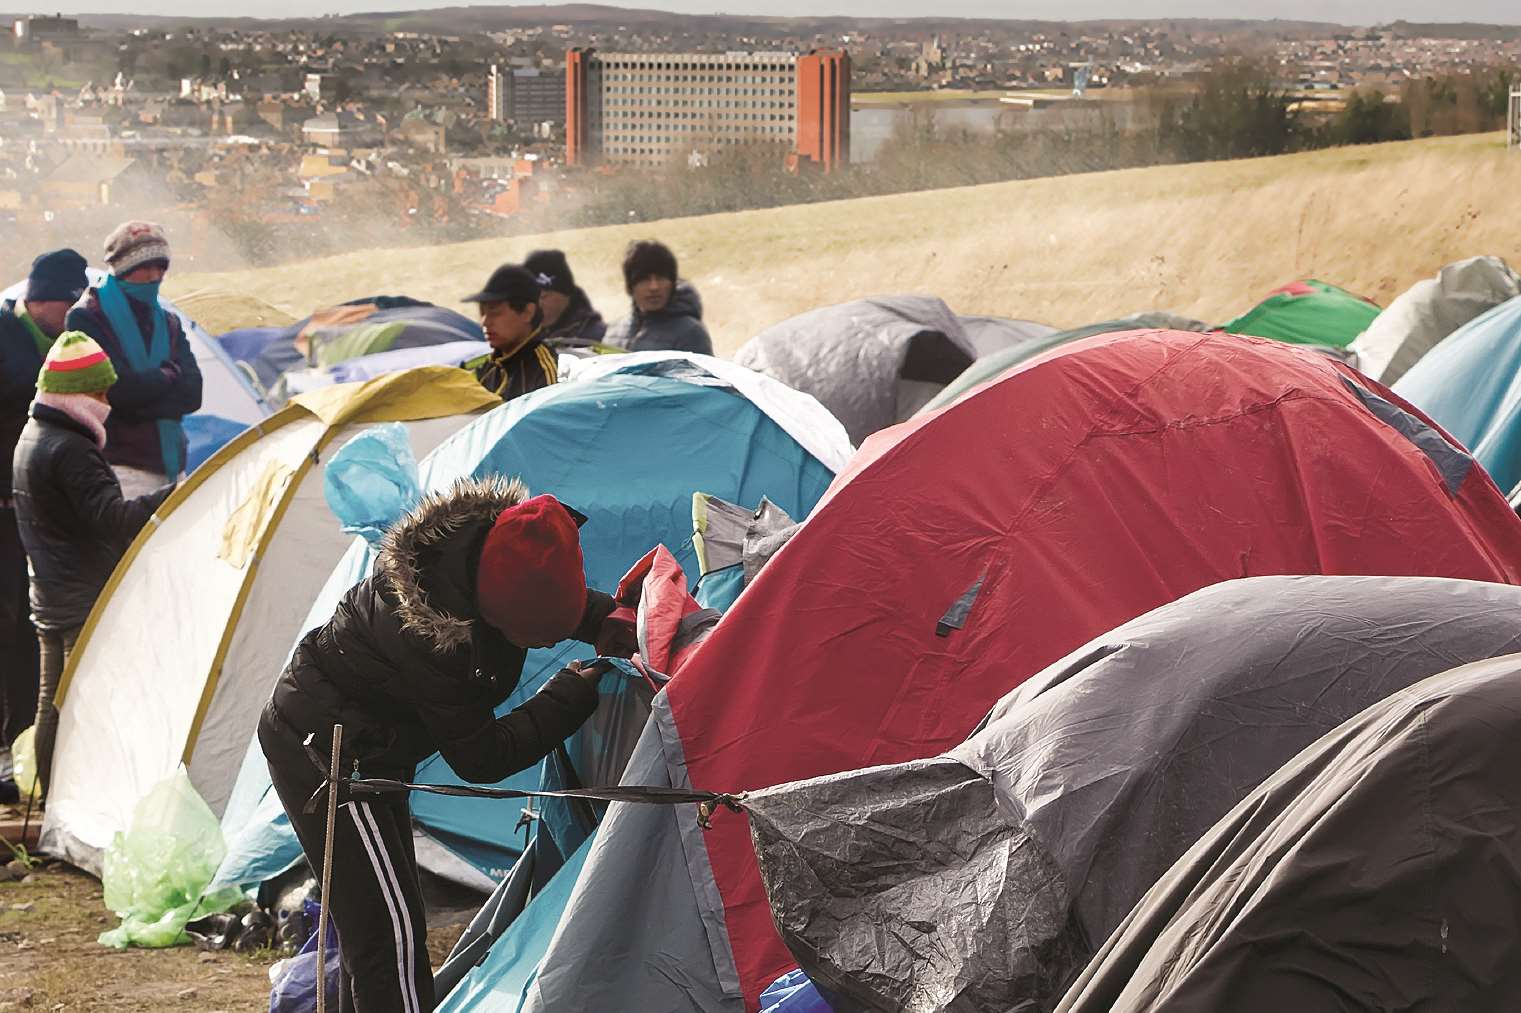 Medway Ukip leader Roy Freshwarter suggests putting refugees in tents in parks. Photoshopped image.